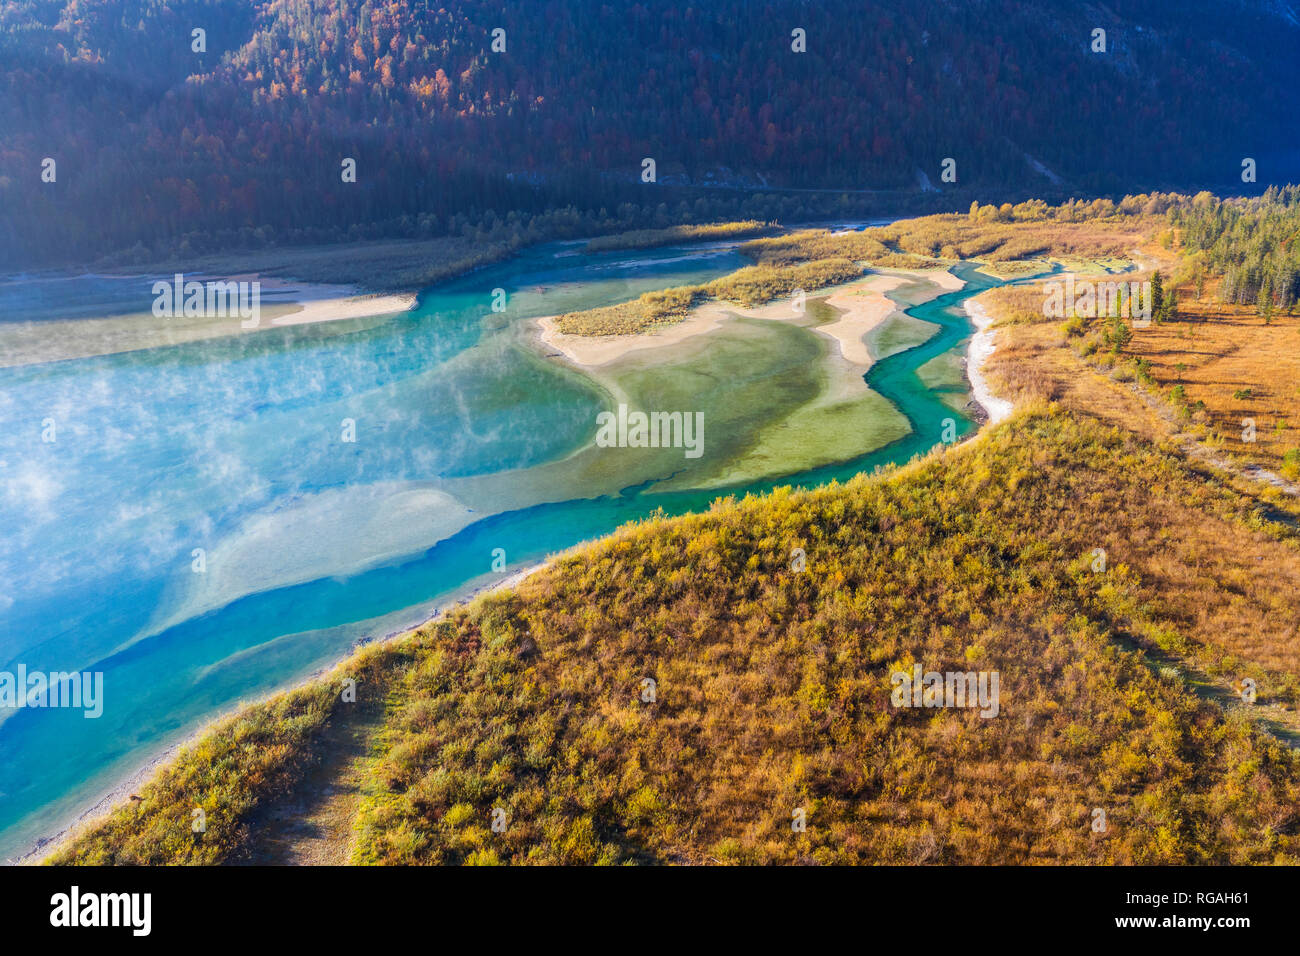 Germany, Lenggries, Isarwinkel, Aerial view of Isar river, at tributary into Sylvenstein Dam in autumn Stock Photo